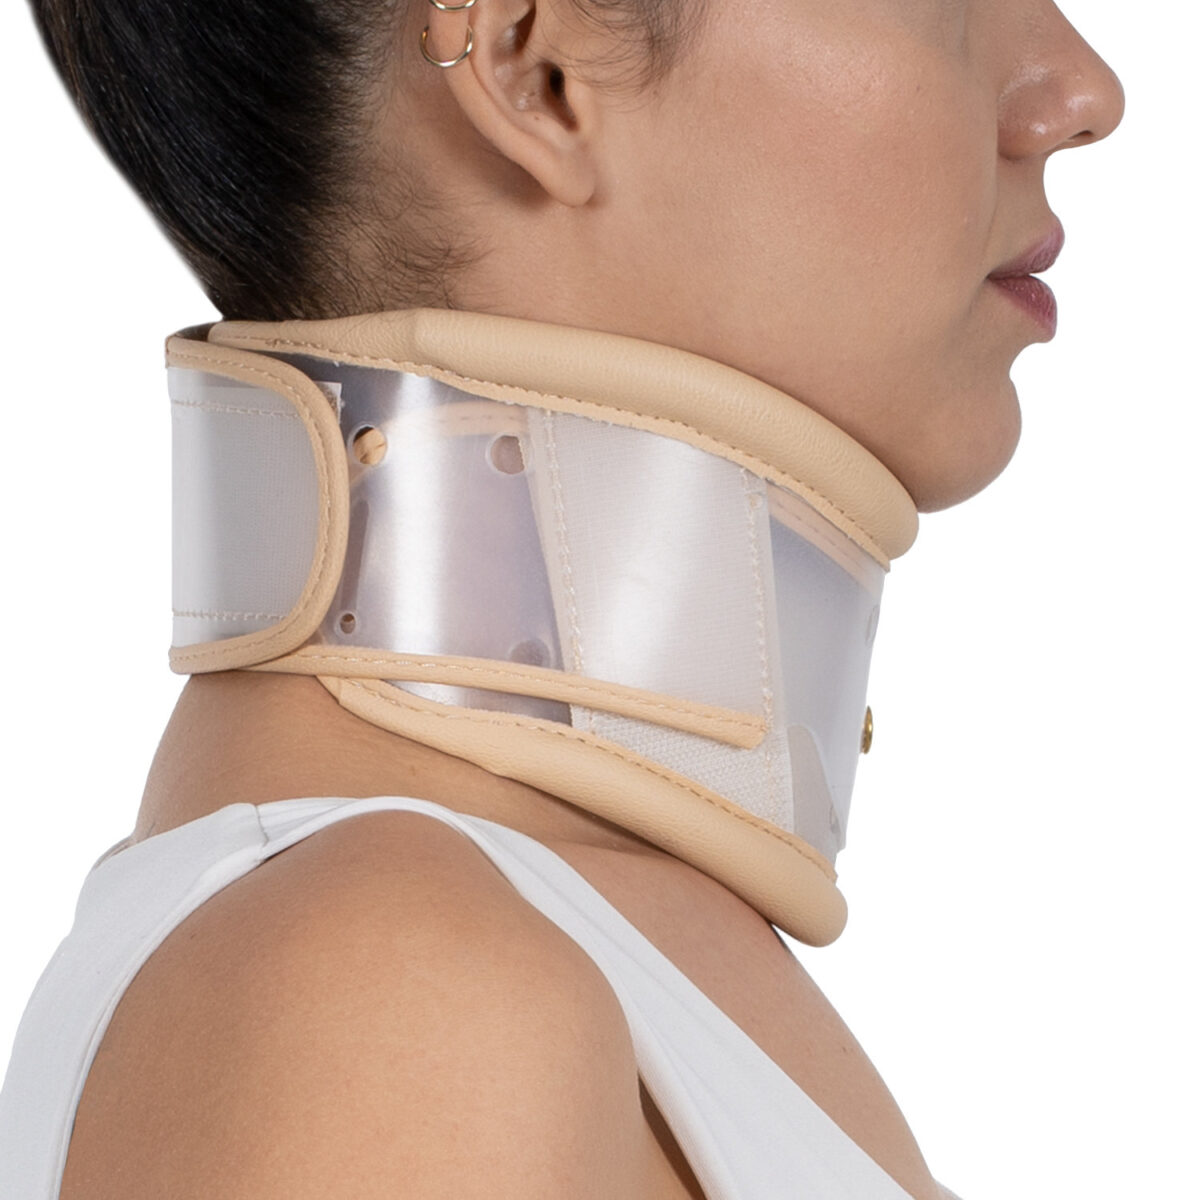 wingmed orthopedic equipments W108 adjustable pvc cervical collar product 1 1